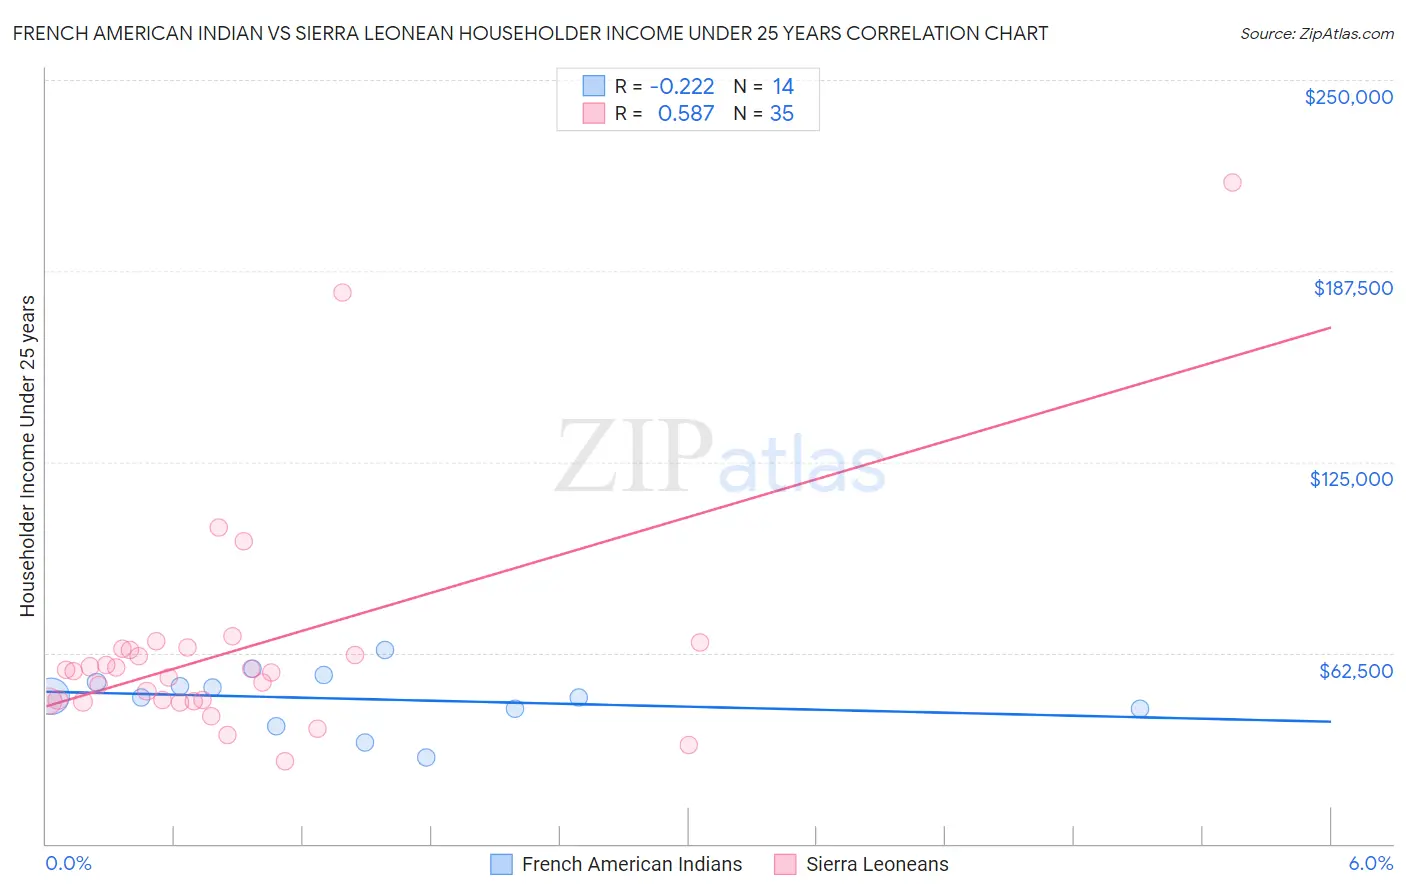 French American Indian vs Sierra Leonean Householder Income Under 25 years